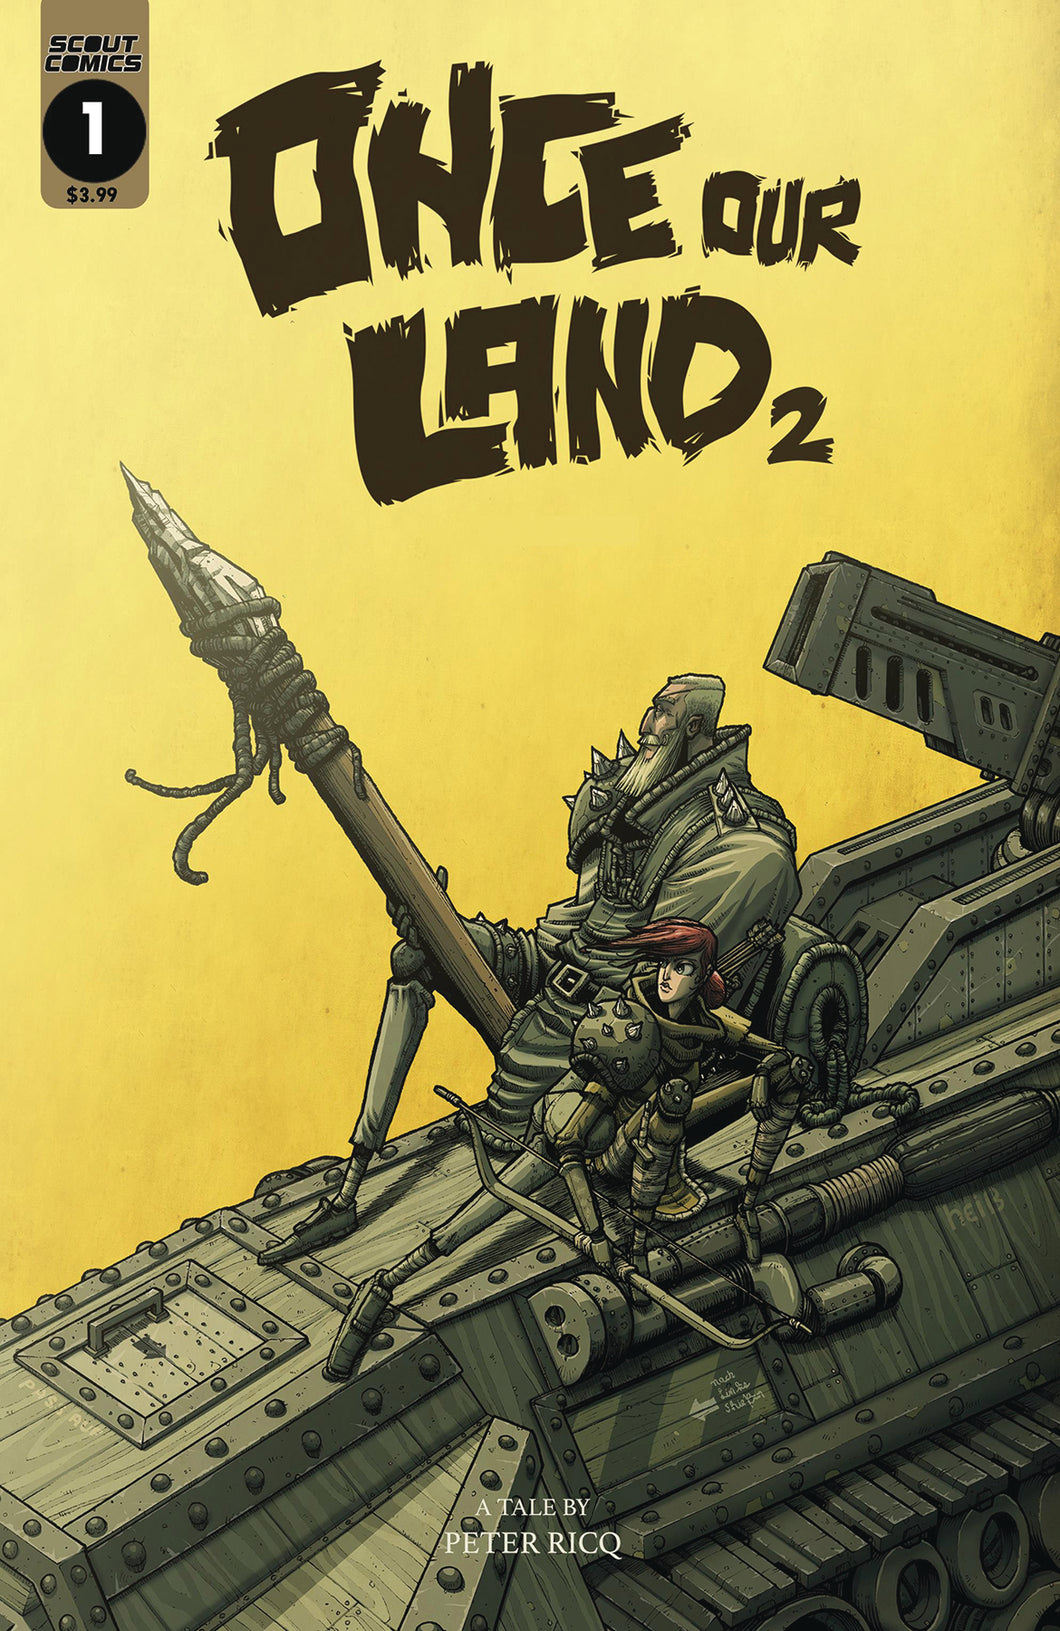 Once Our Land 2 #1 (Cover A - Ricq)